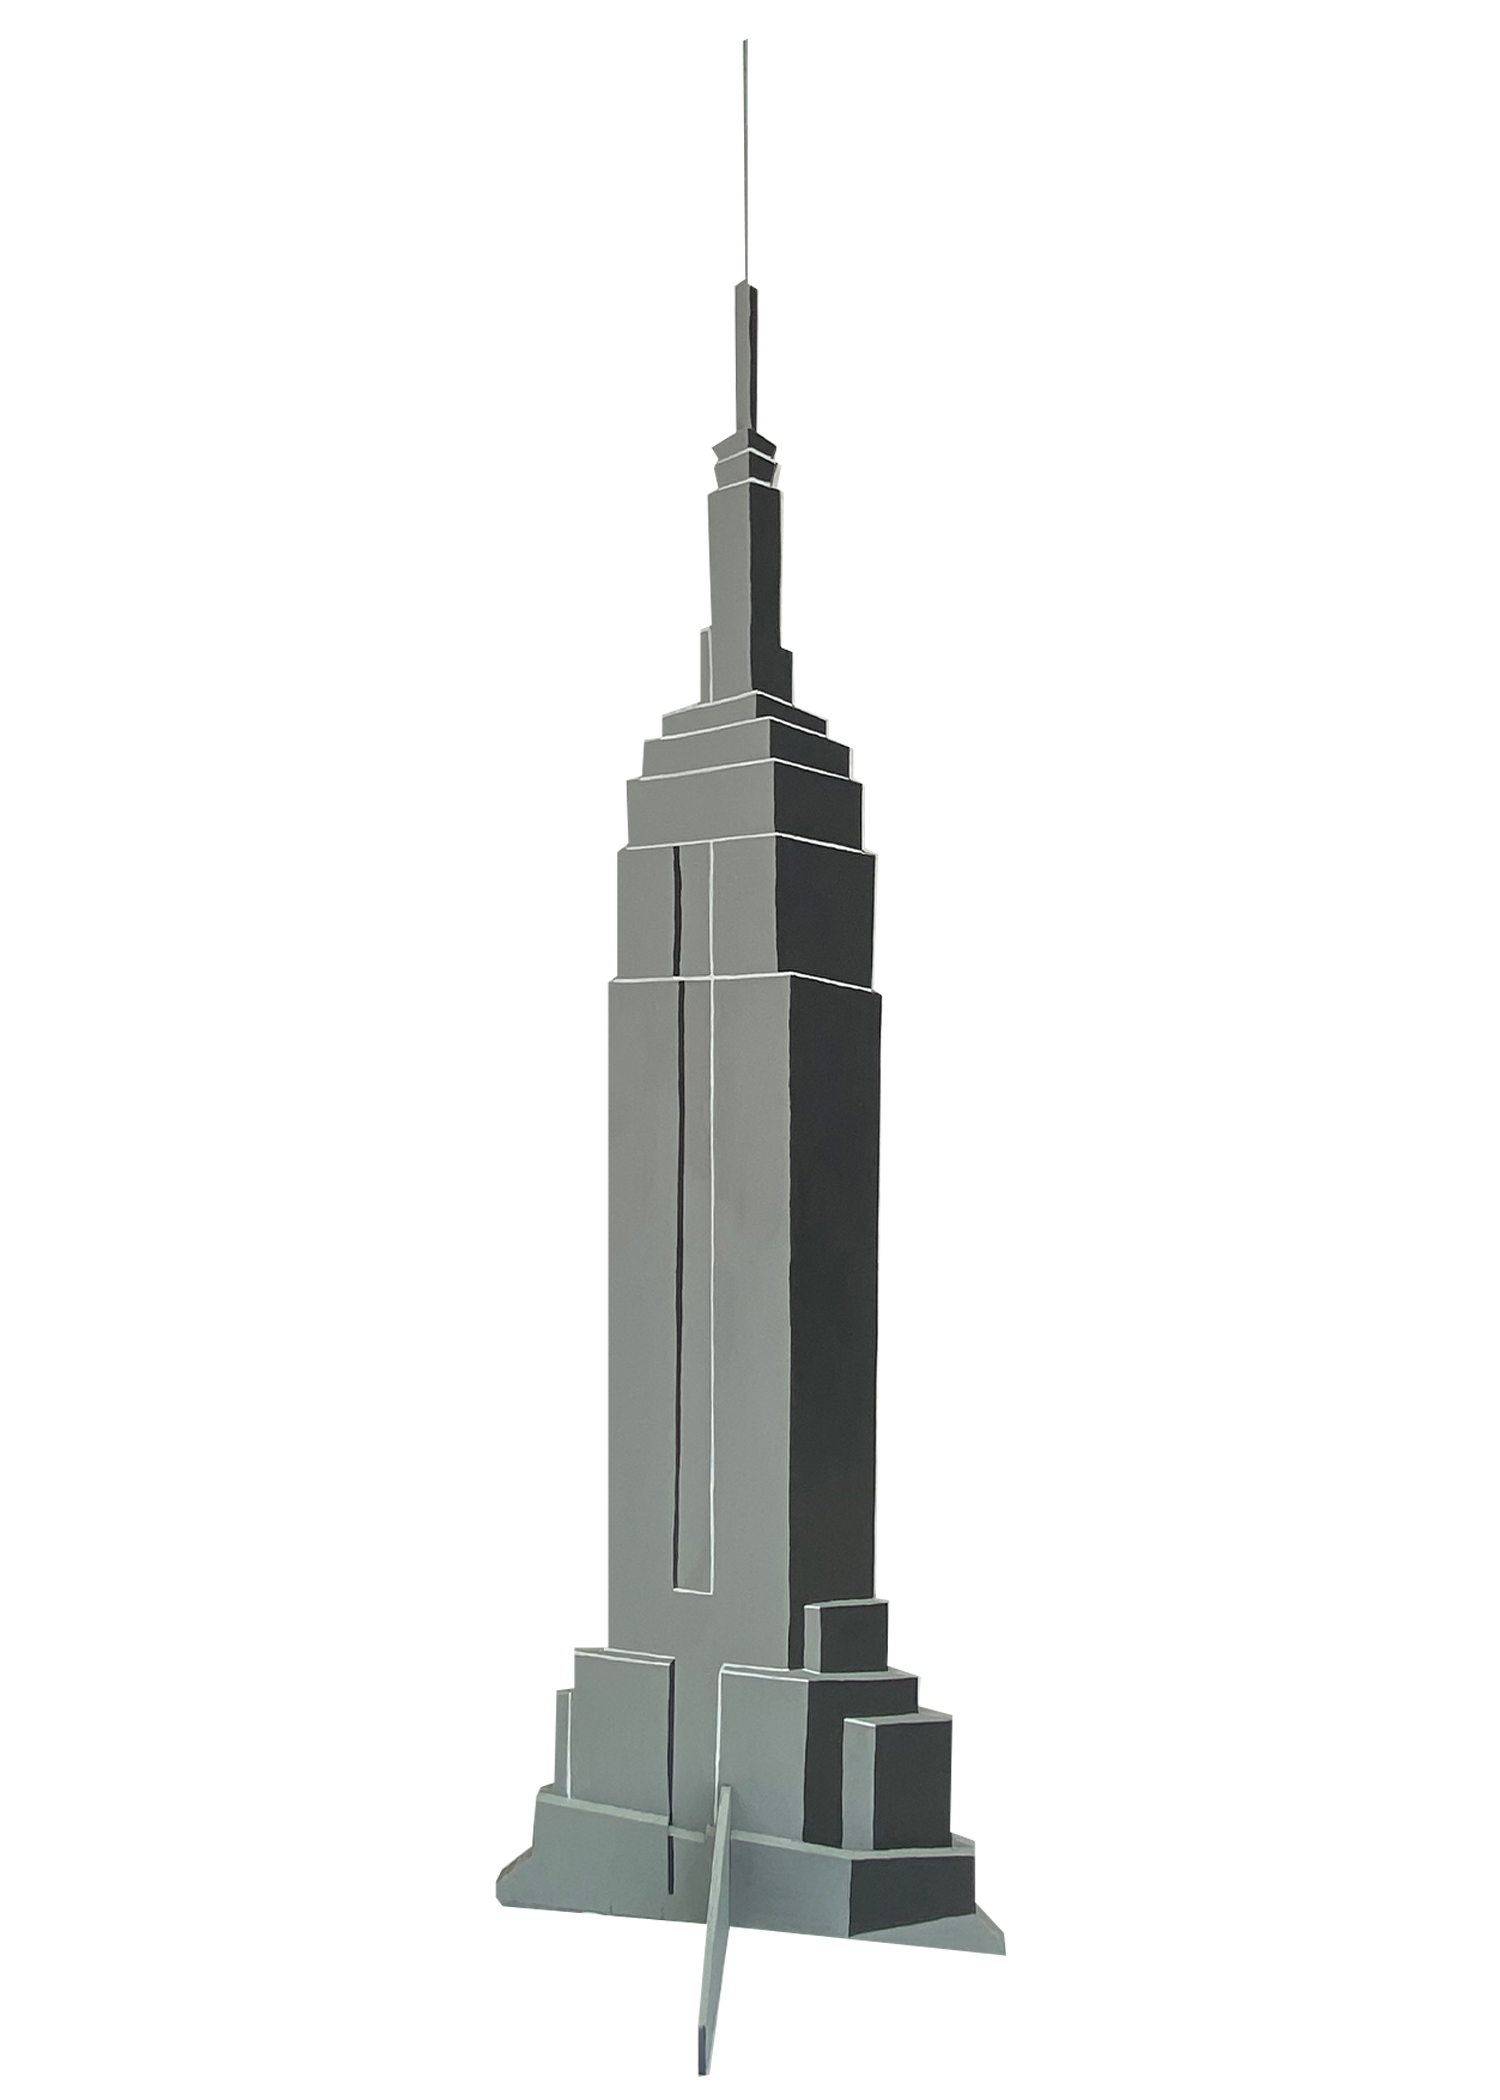 Empire State Building Cut-out (H: 1.8m) 